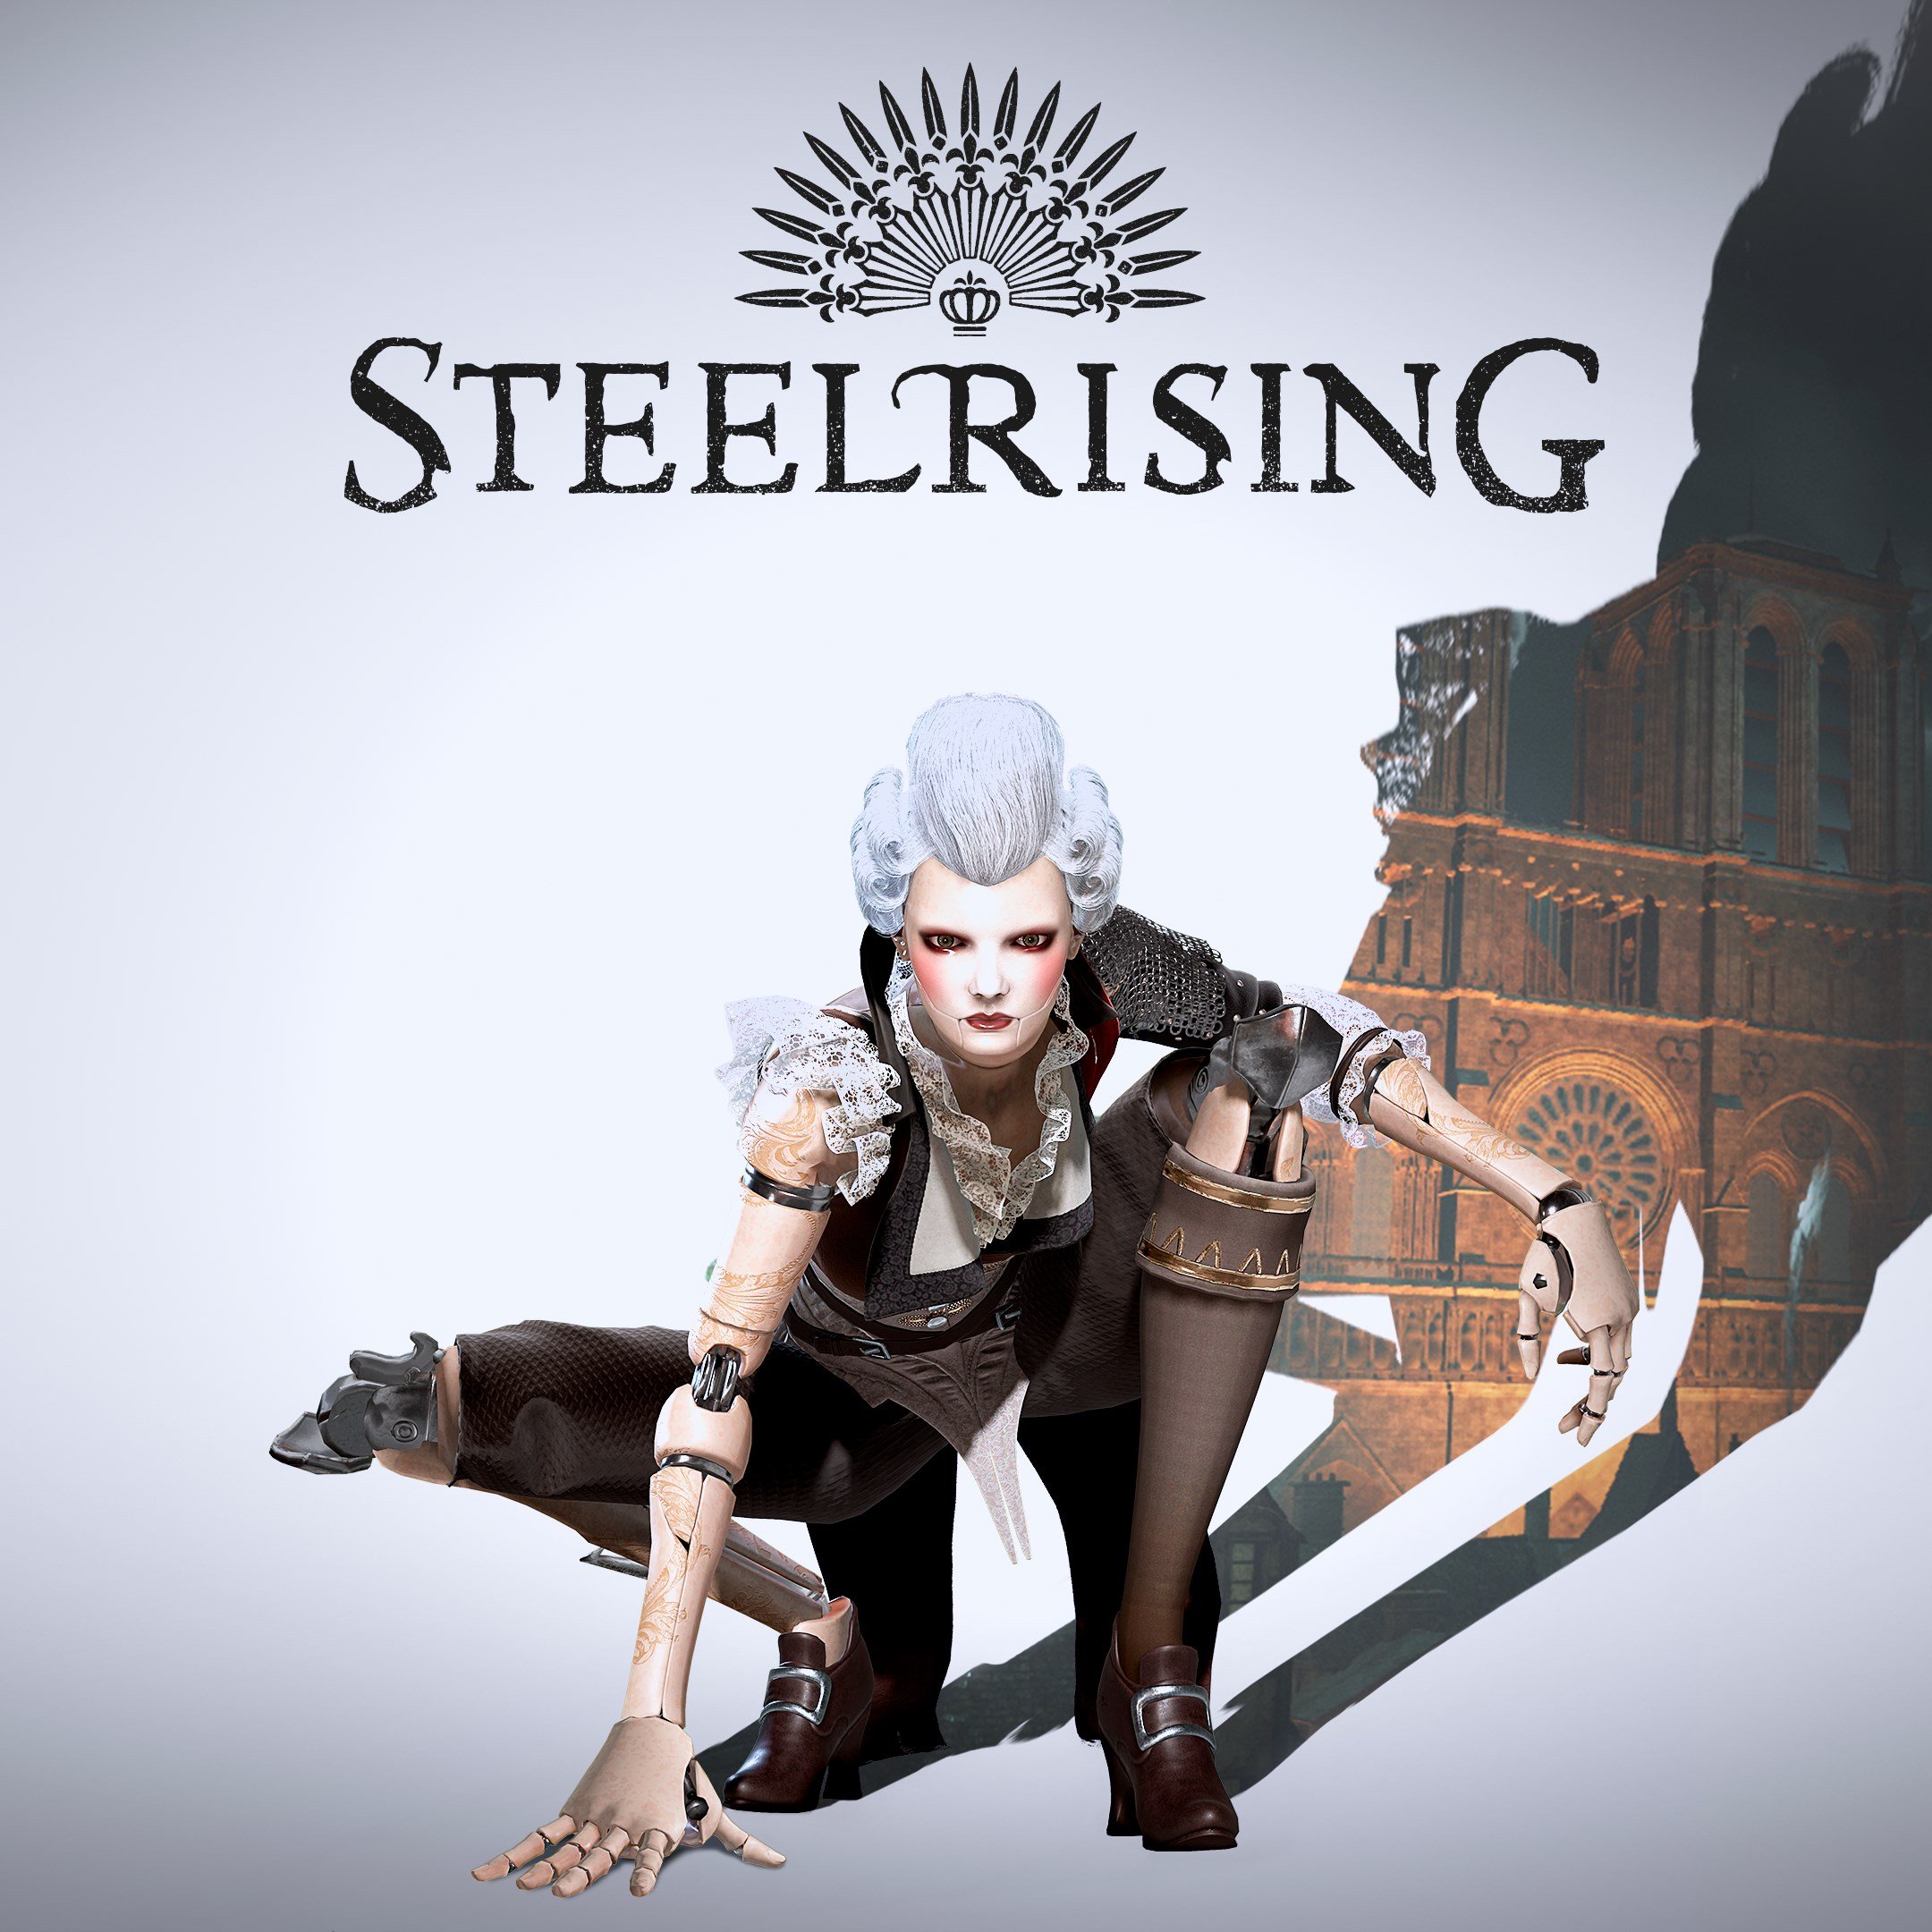 Boxart for steelrising